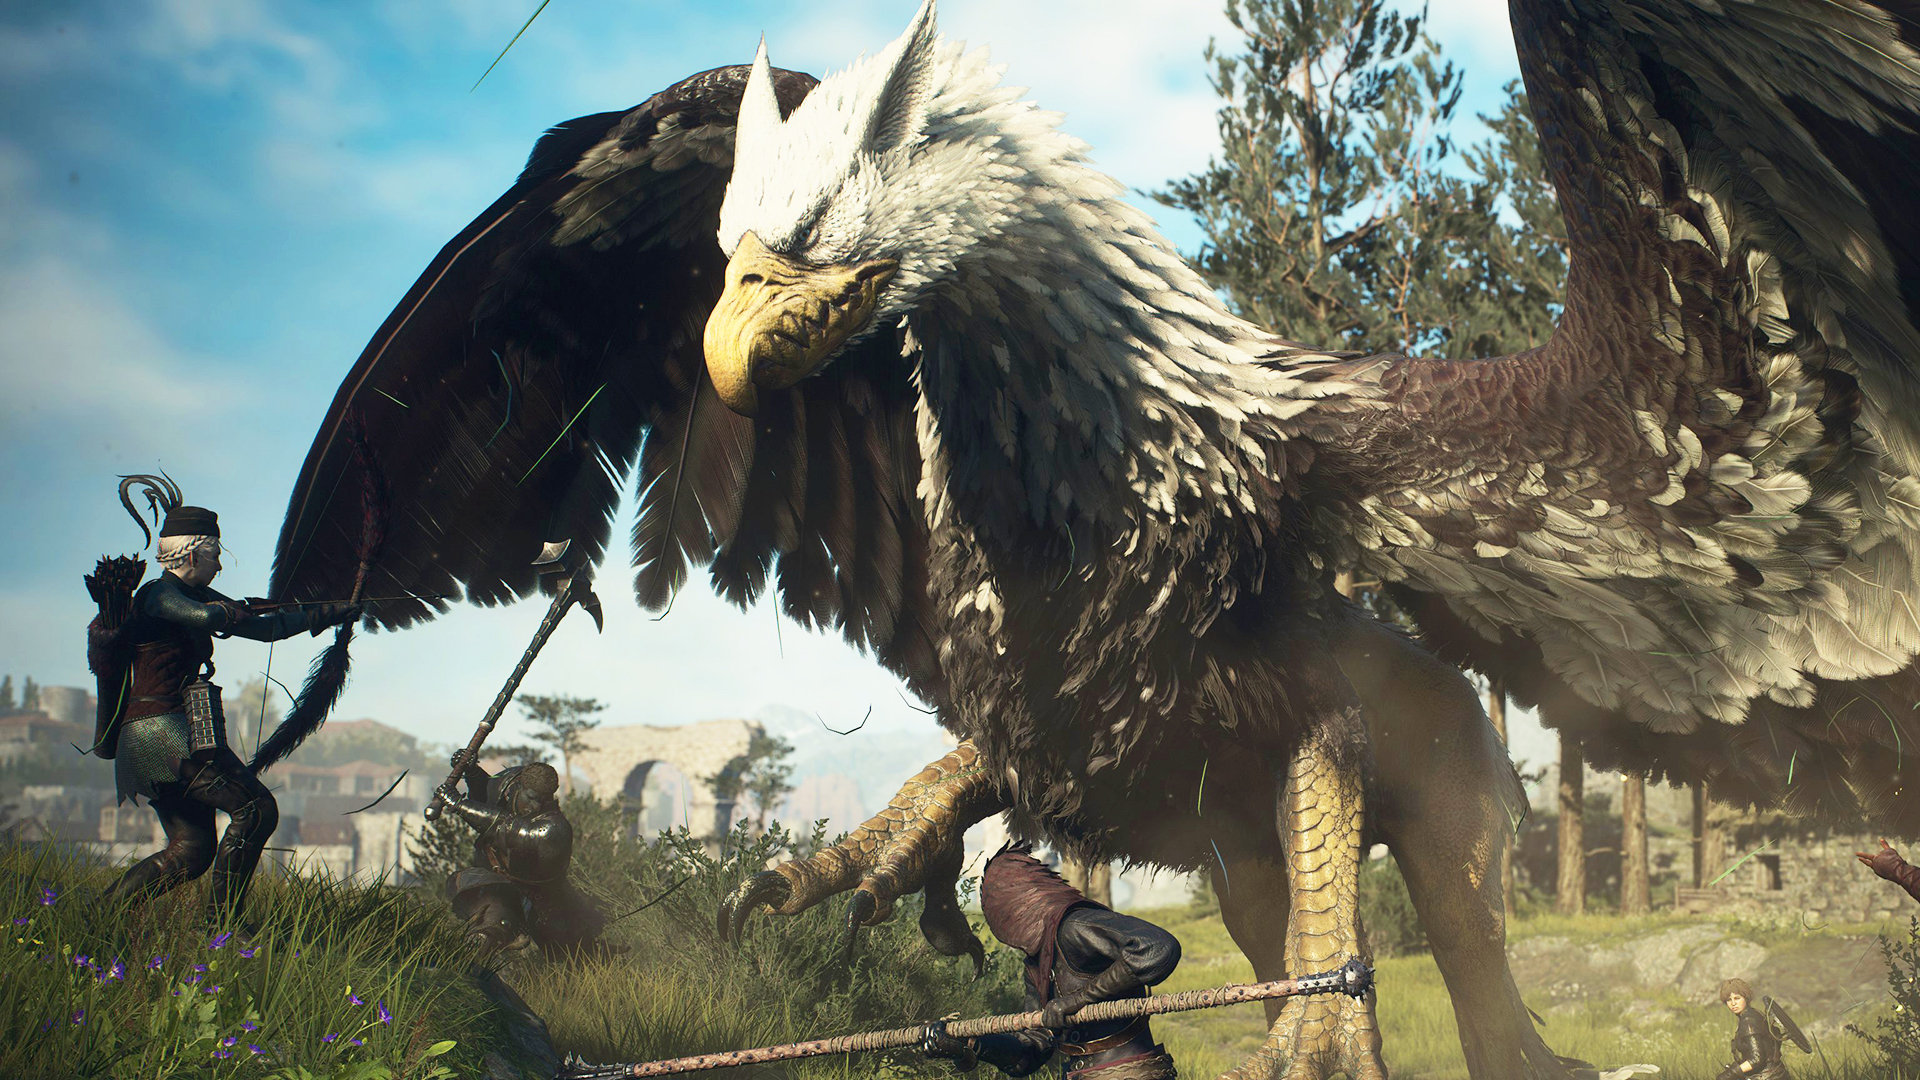 The award for Dragon’s Dogma 2’s biggest jerks goes to the griffins